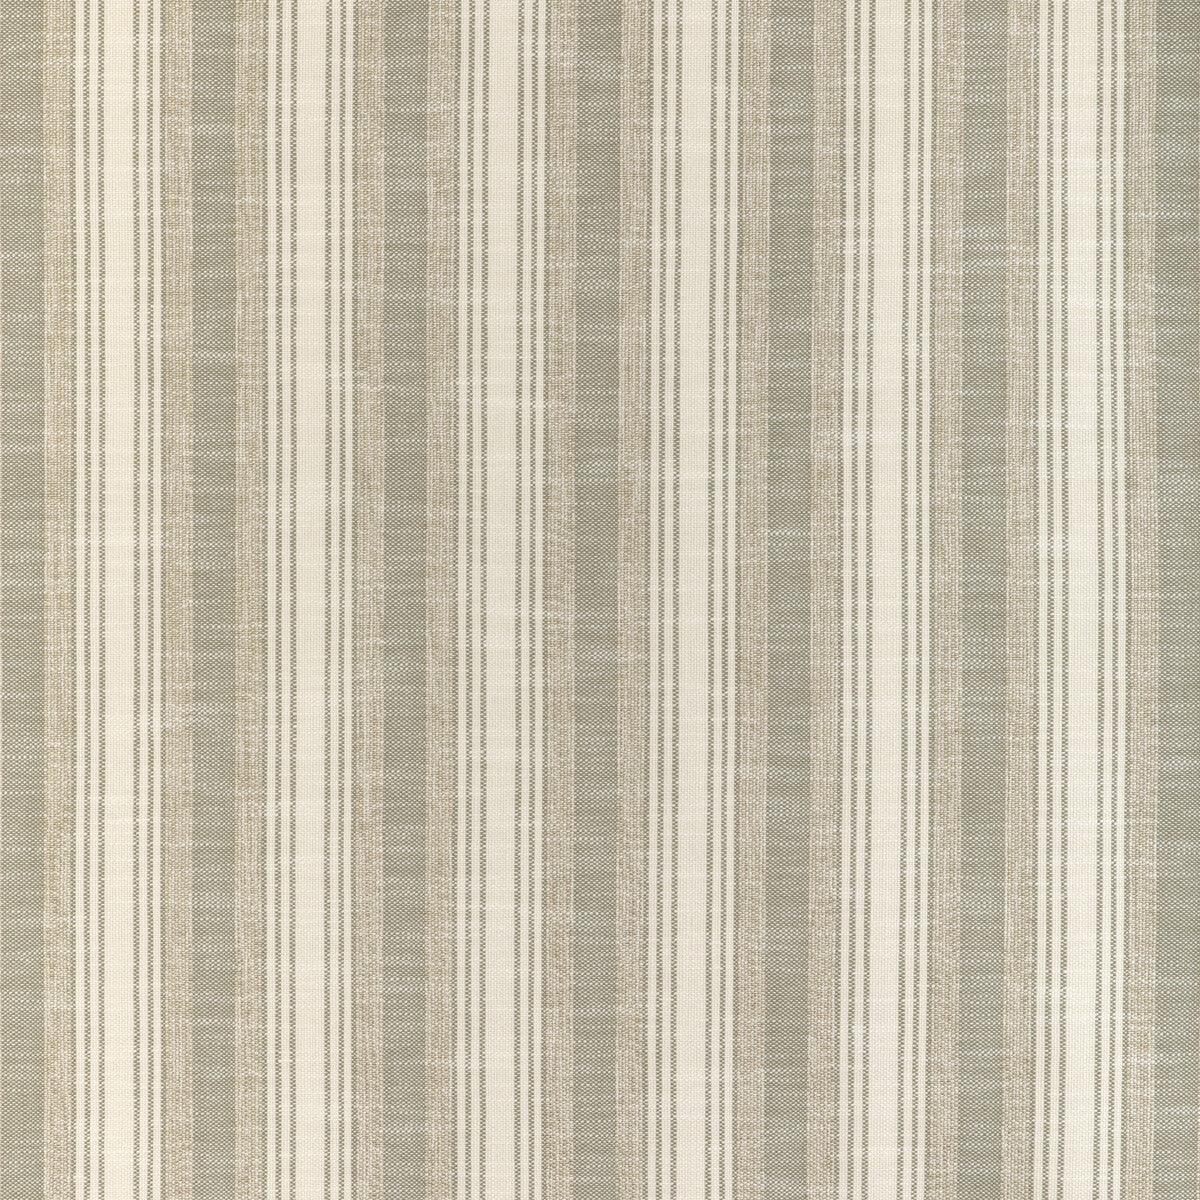 Sims Stripe fabric in stone color - pattern 37046.106.0 - by Kravet Design in the Thom Filicia Latitude collection